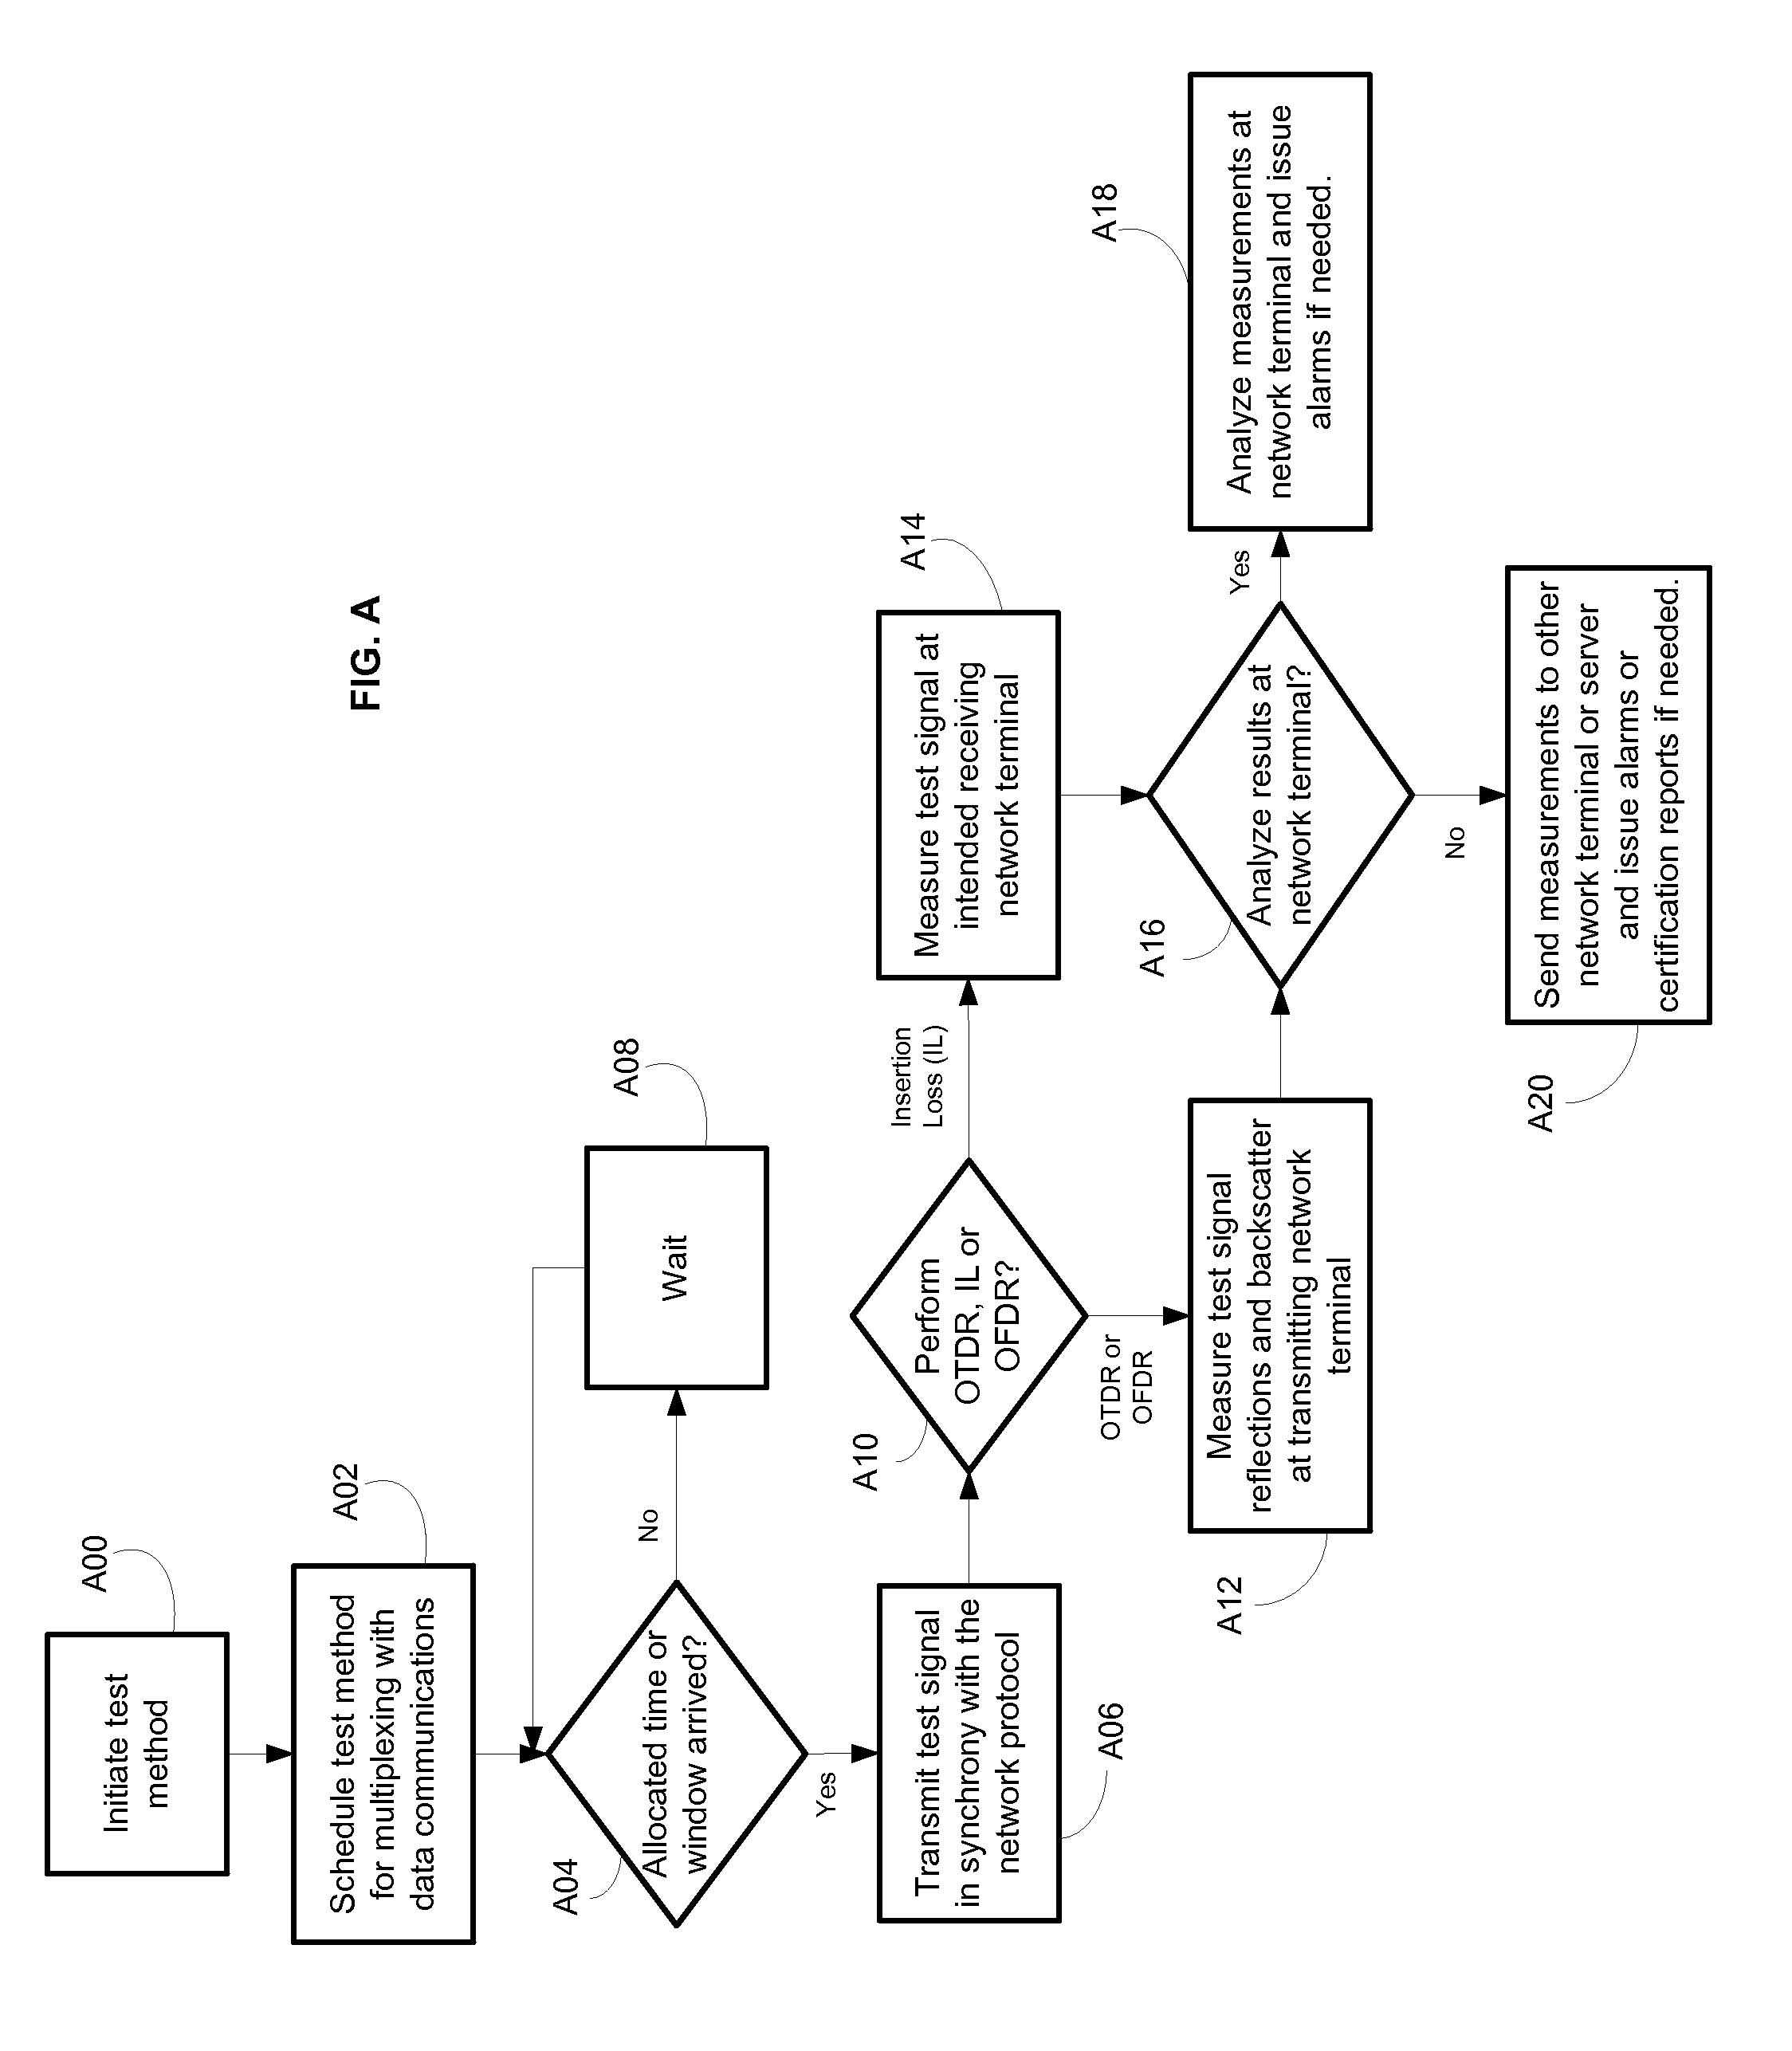 System and method for performing in-service optical network certification